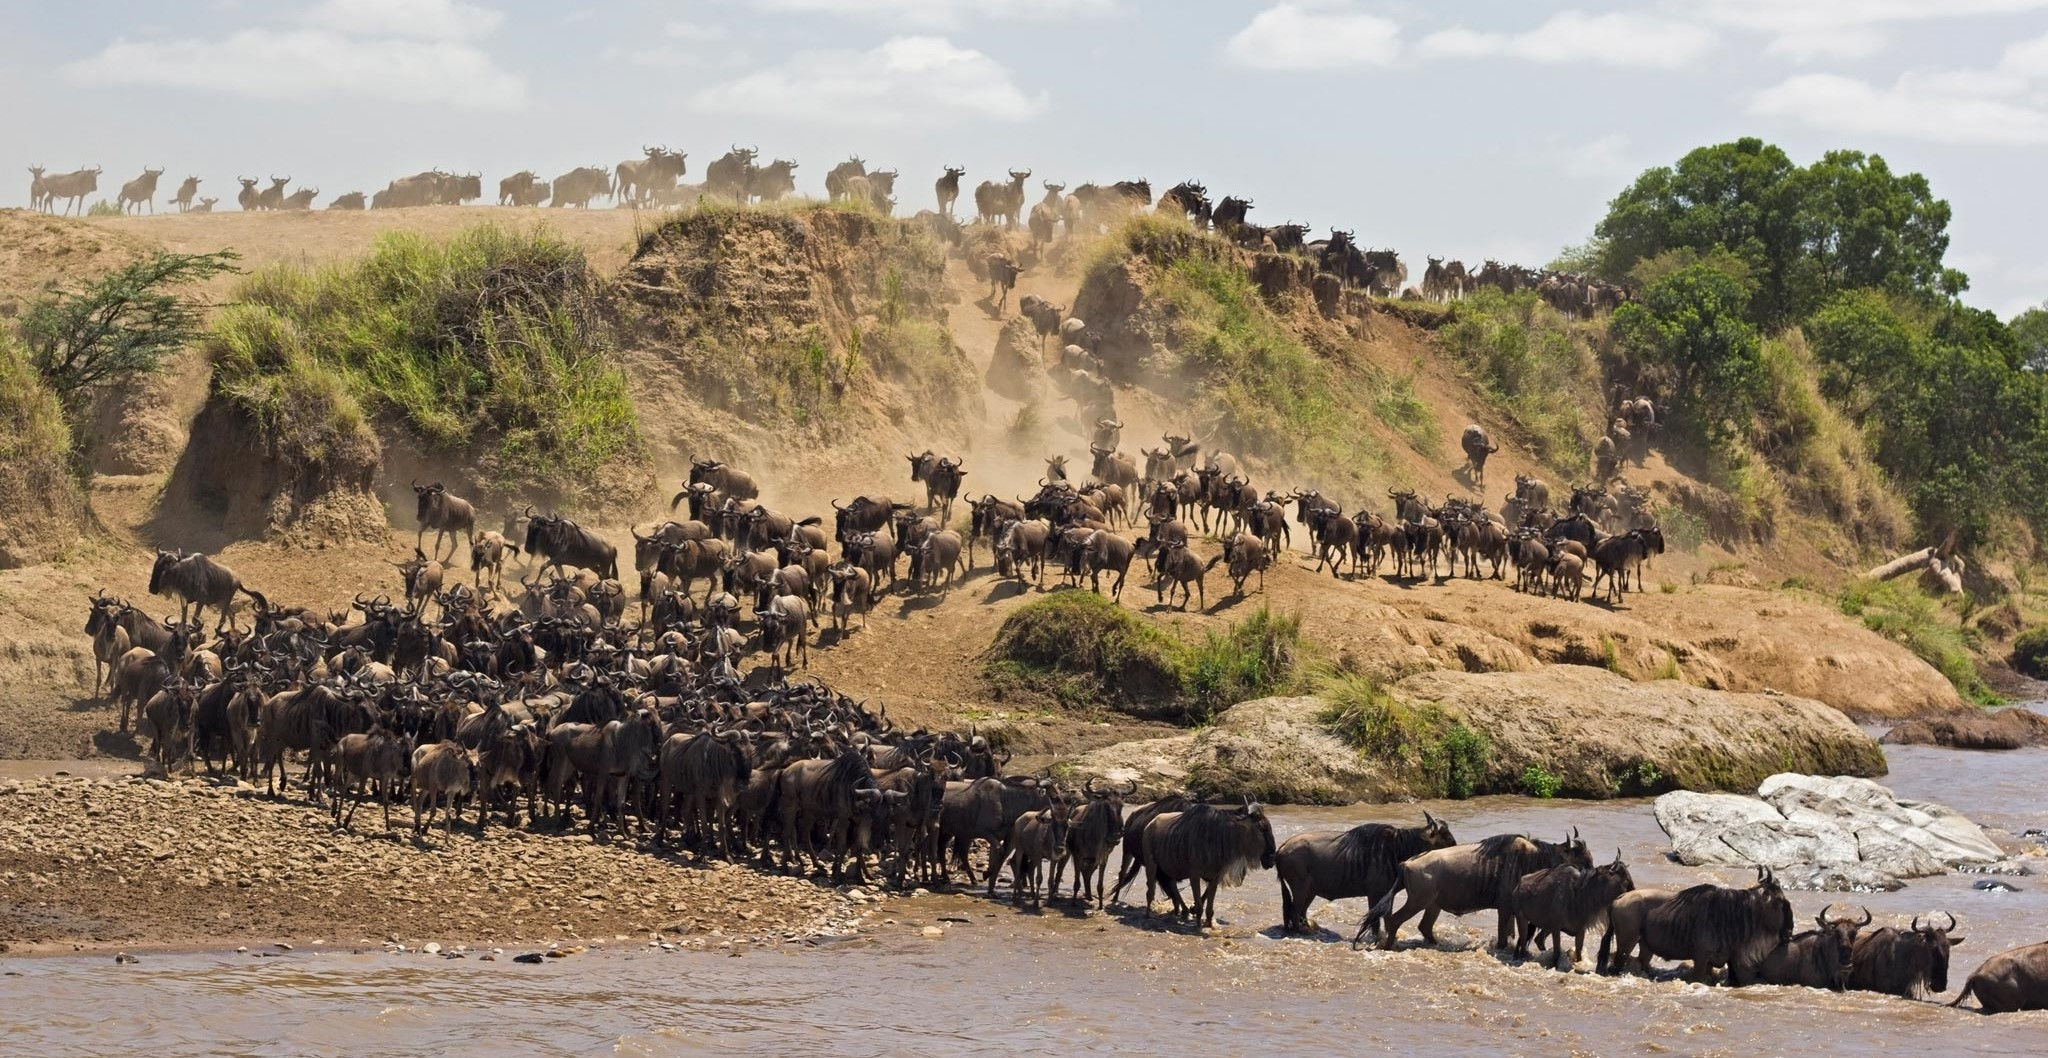 5 Things You Never “Gnu” About The Great Wildebeest Migration